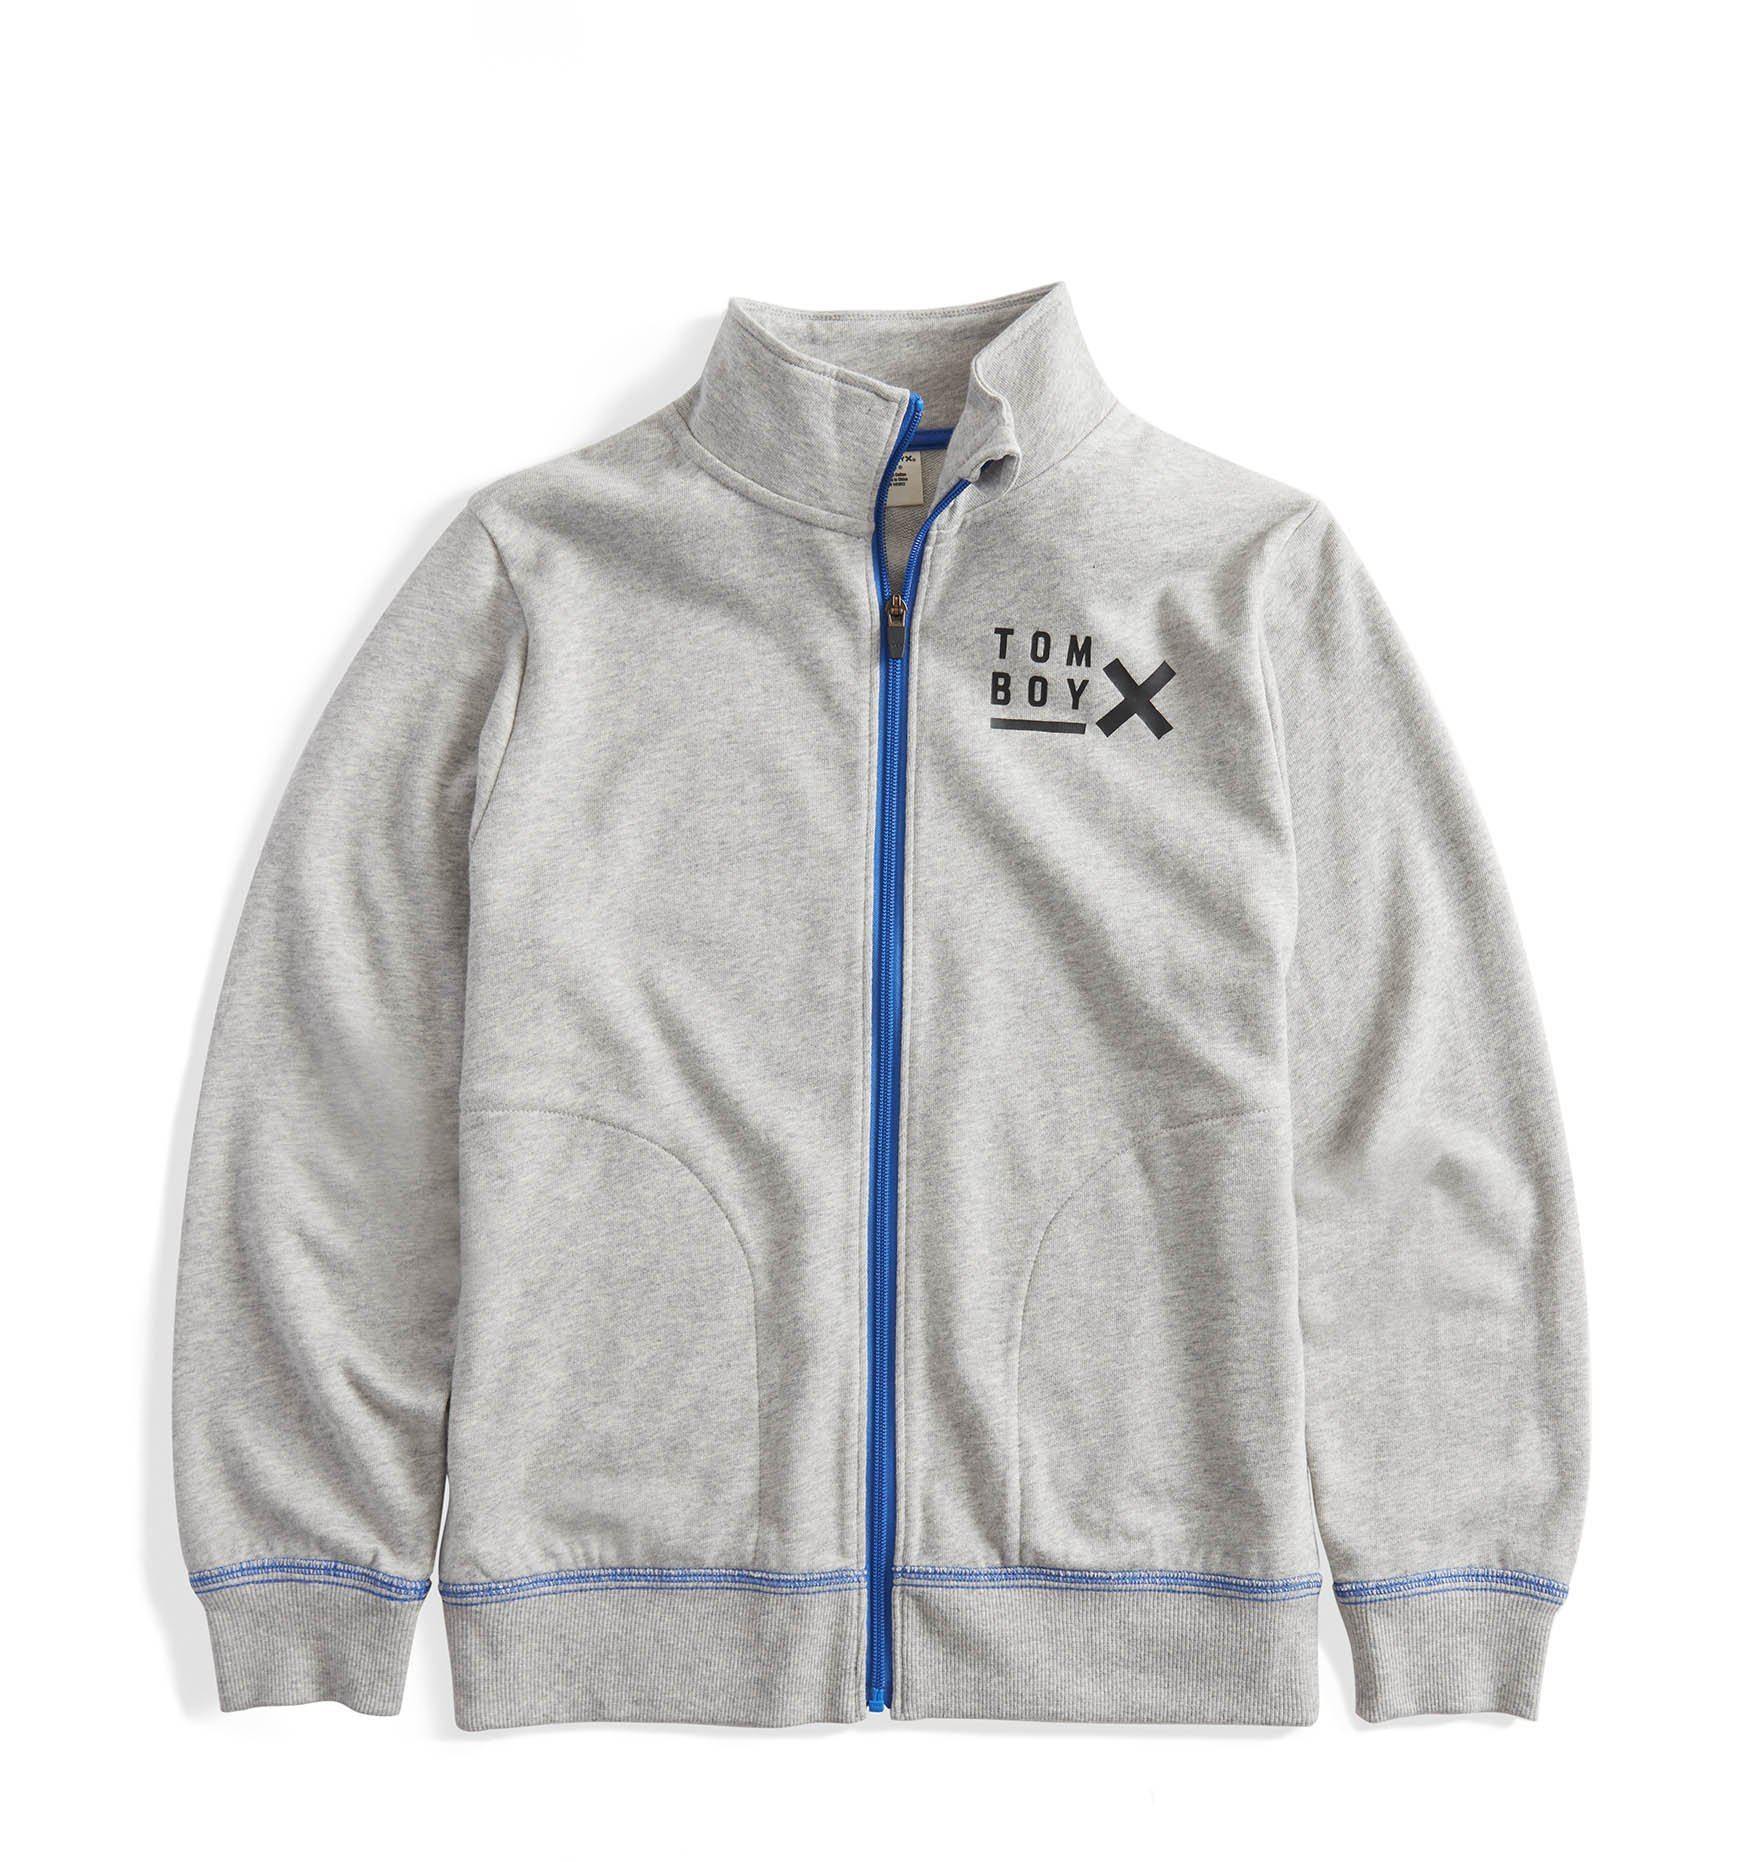 French Terry Full Zip Sweatshirt LC - TomboyX Heather Grey with Blue